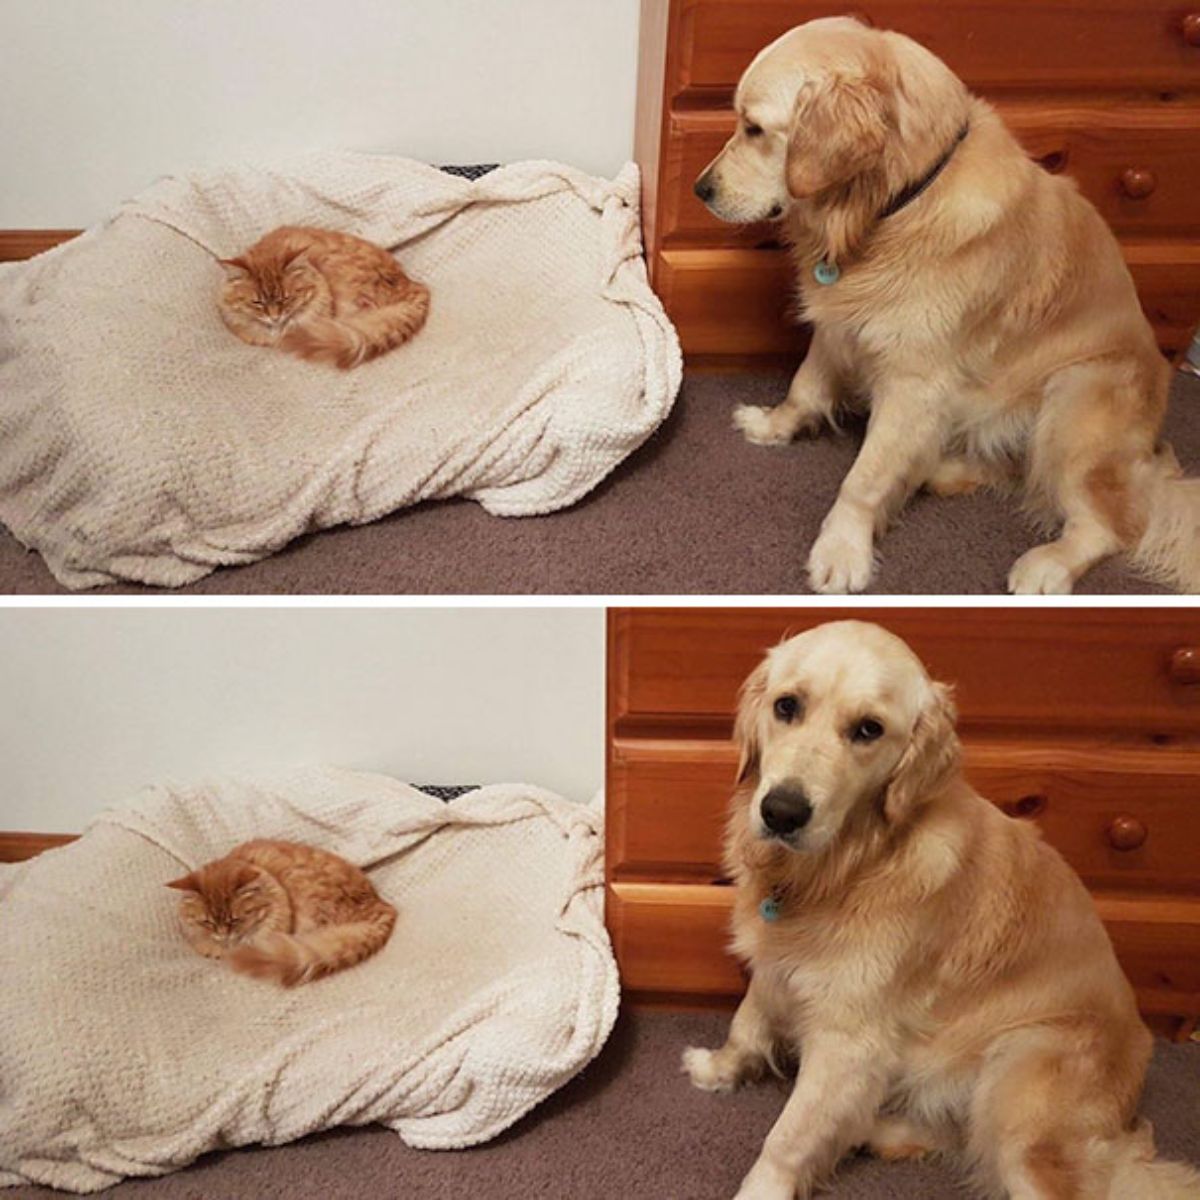 two photos of an orange cat sleeping on a large white dog bed and an unhappy golden retriever next to it